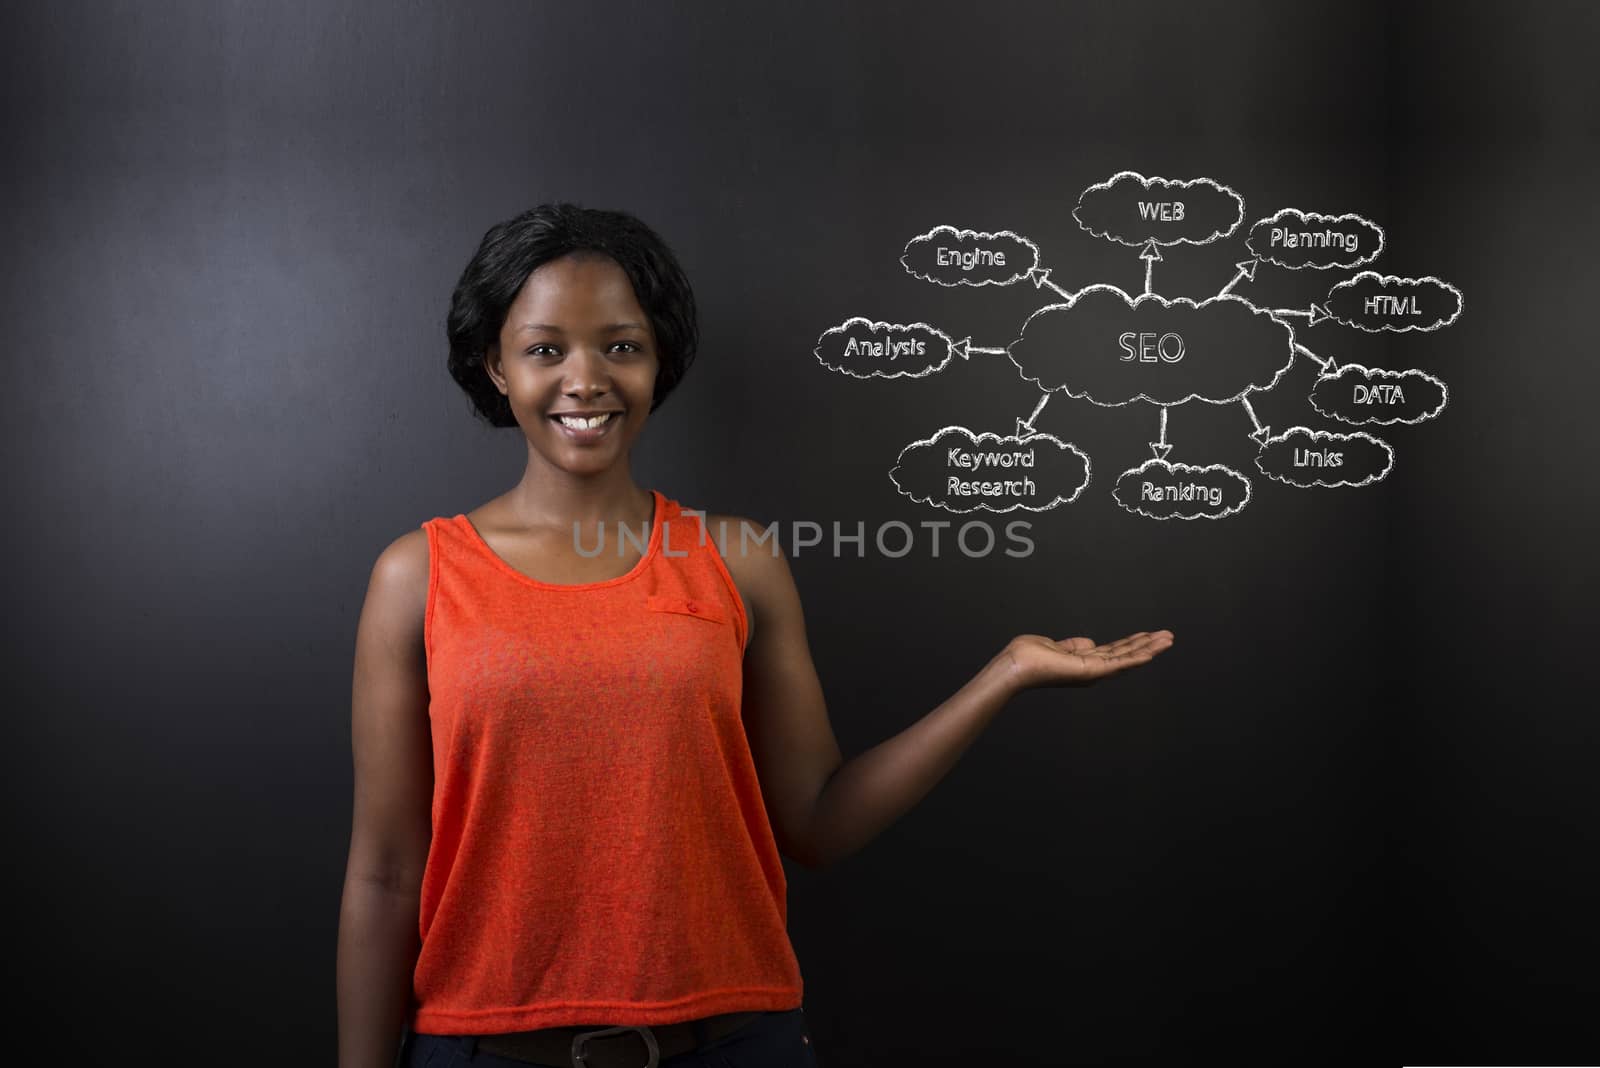 South African or African American woman teacher or student holding hand out against a blackboard background with a chalk SEO diagram